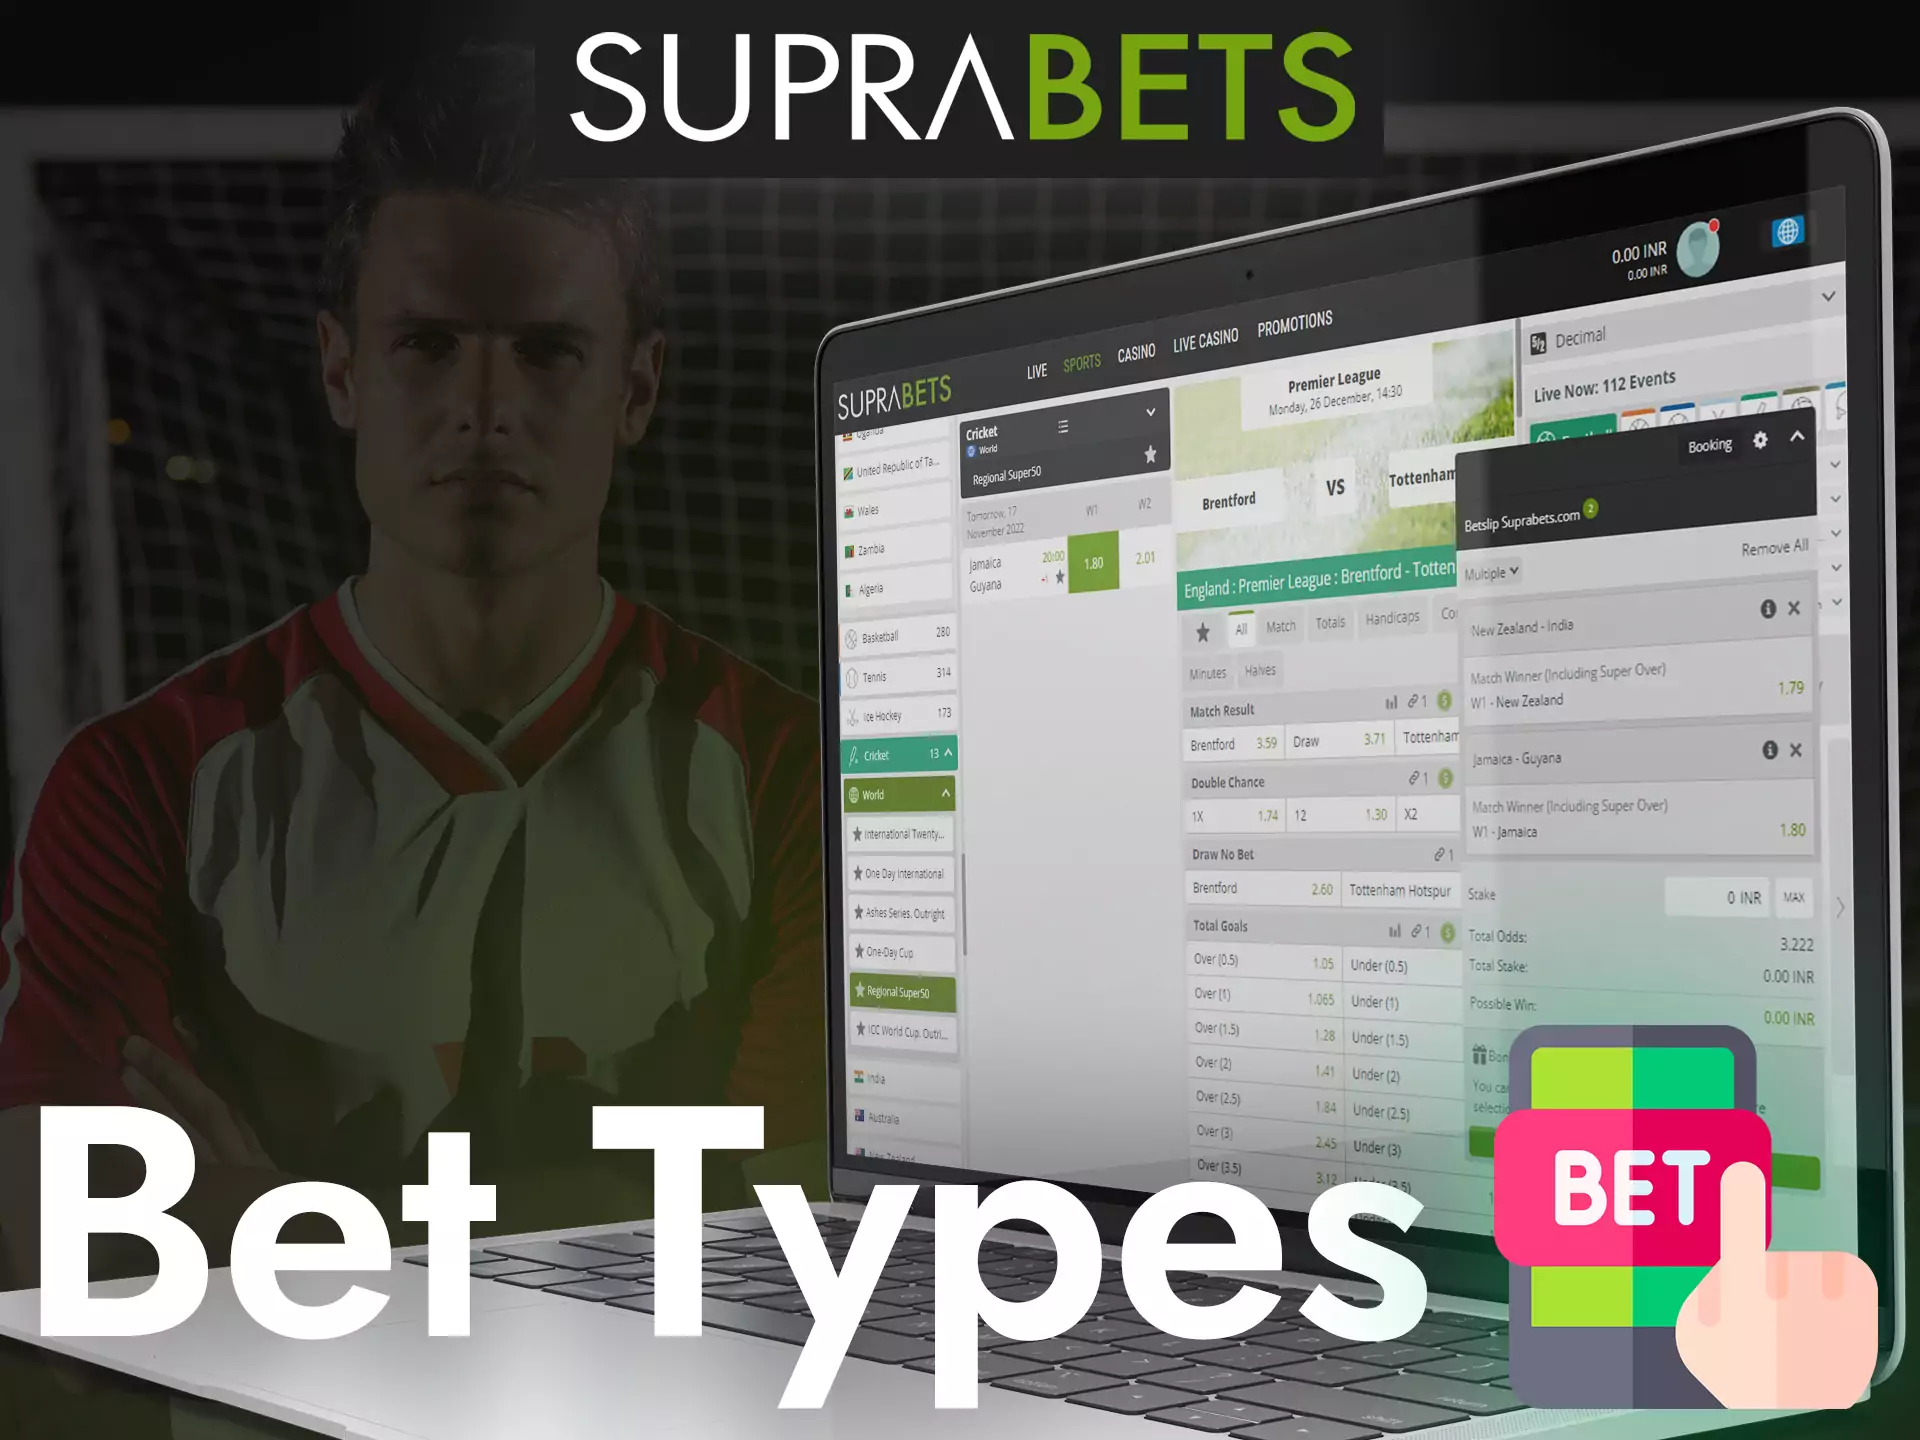 Various types of bets are available to players in Suprabets.